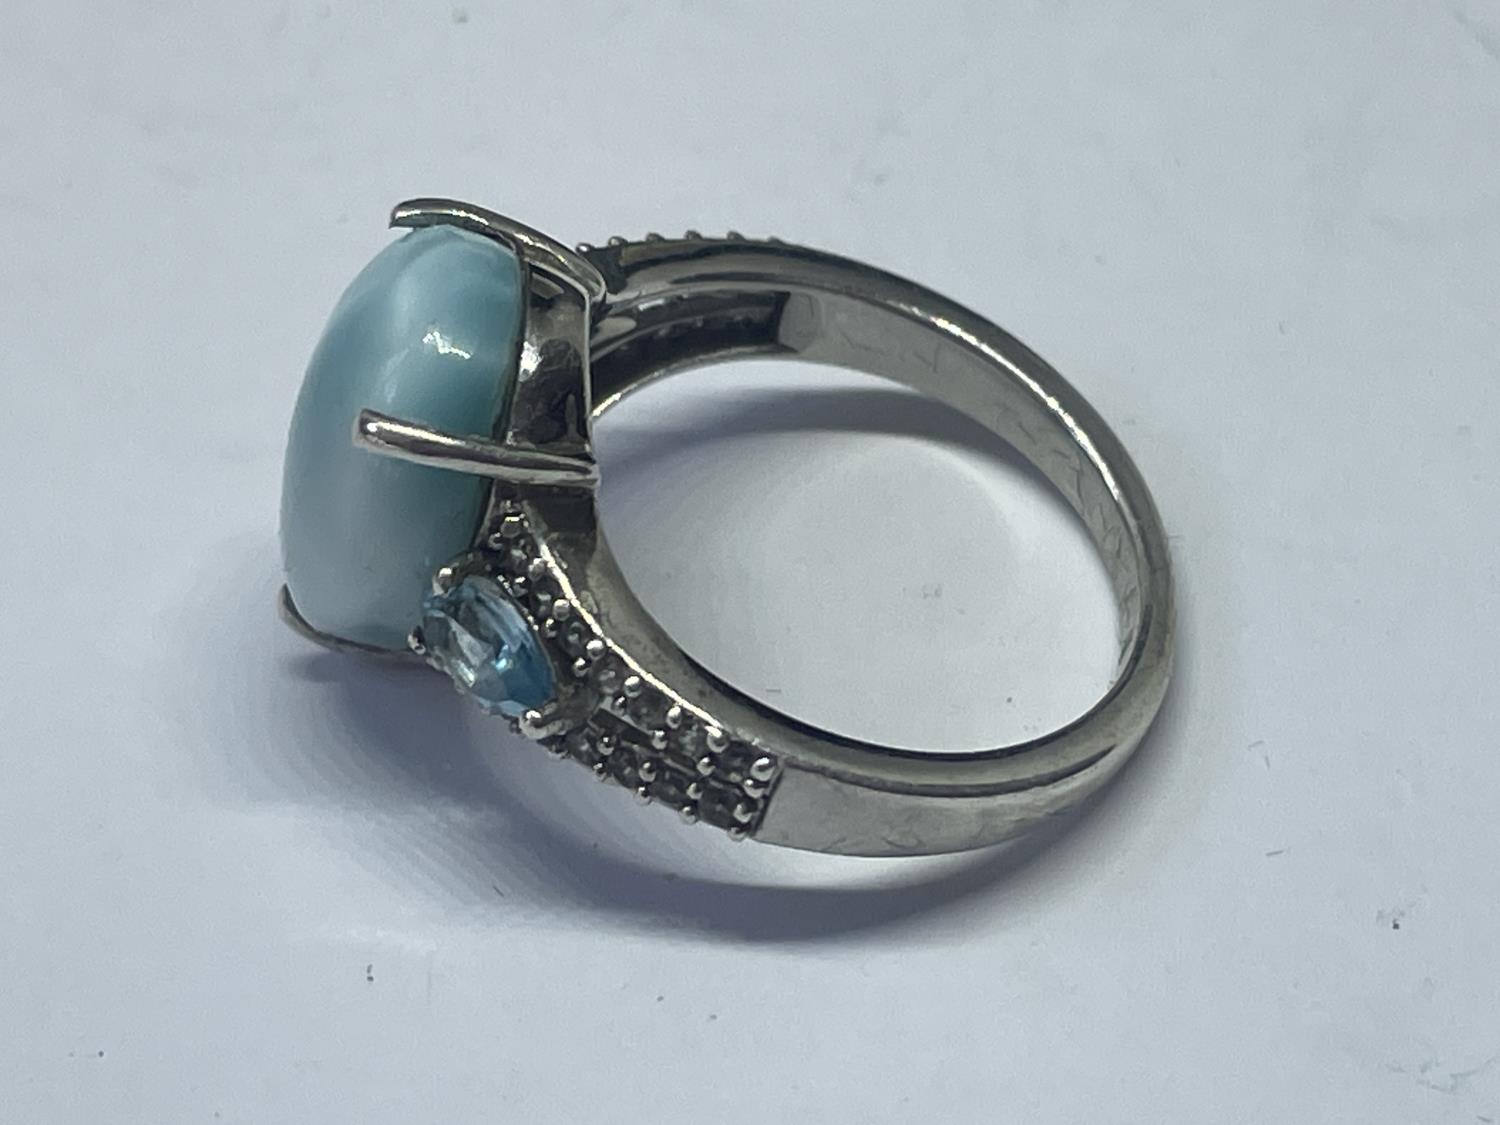 A SILVER DRESS RING IN A PRESENTATION BOX - Image 3 of 3